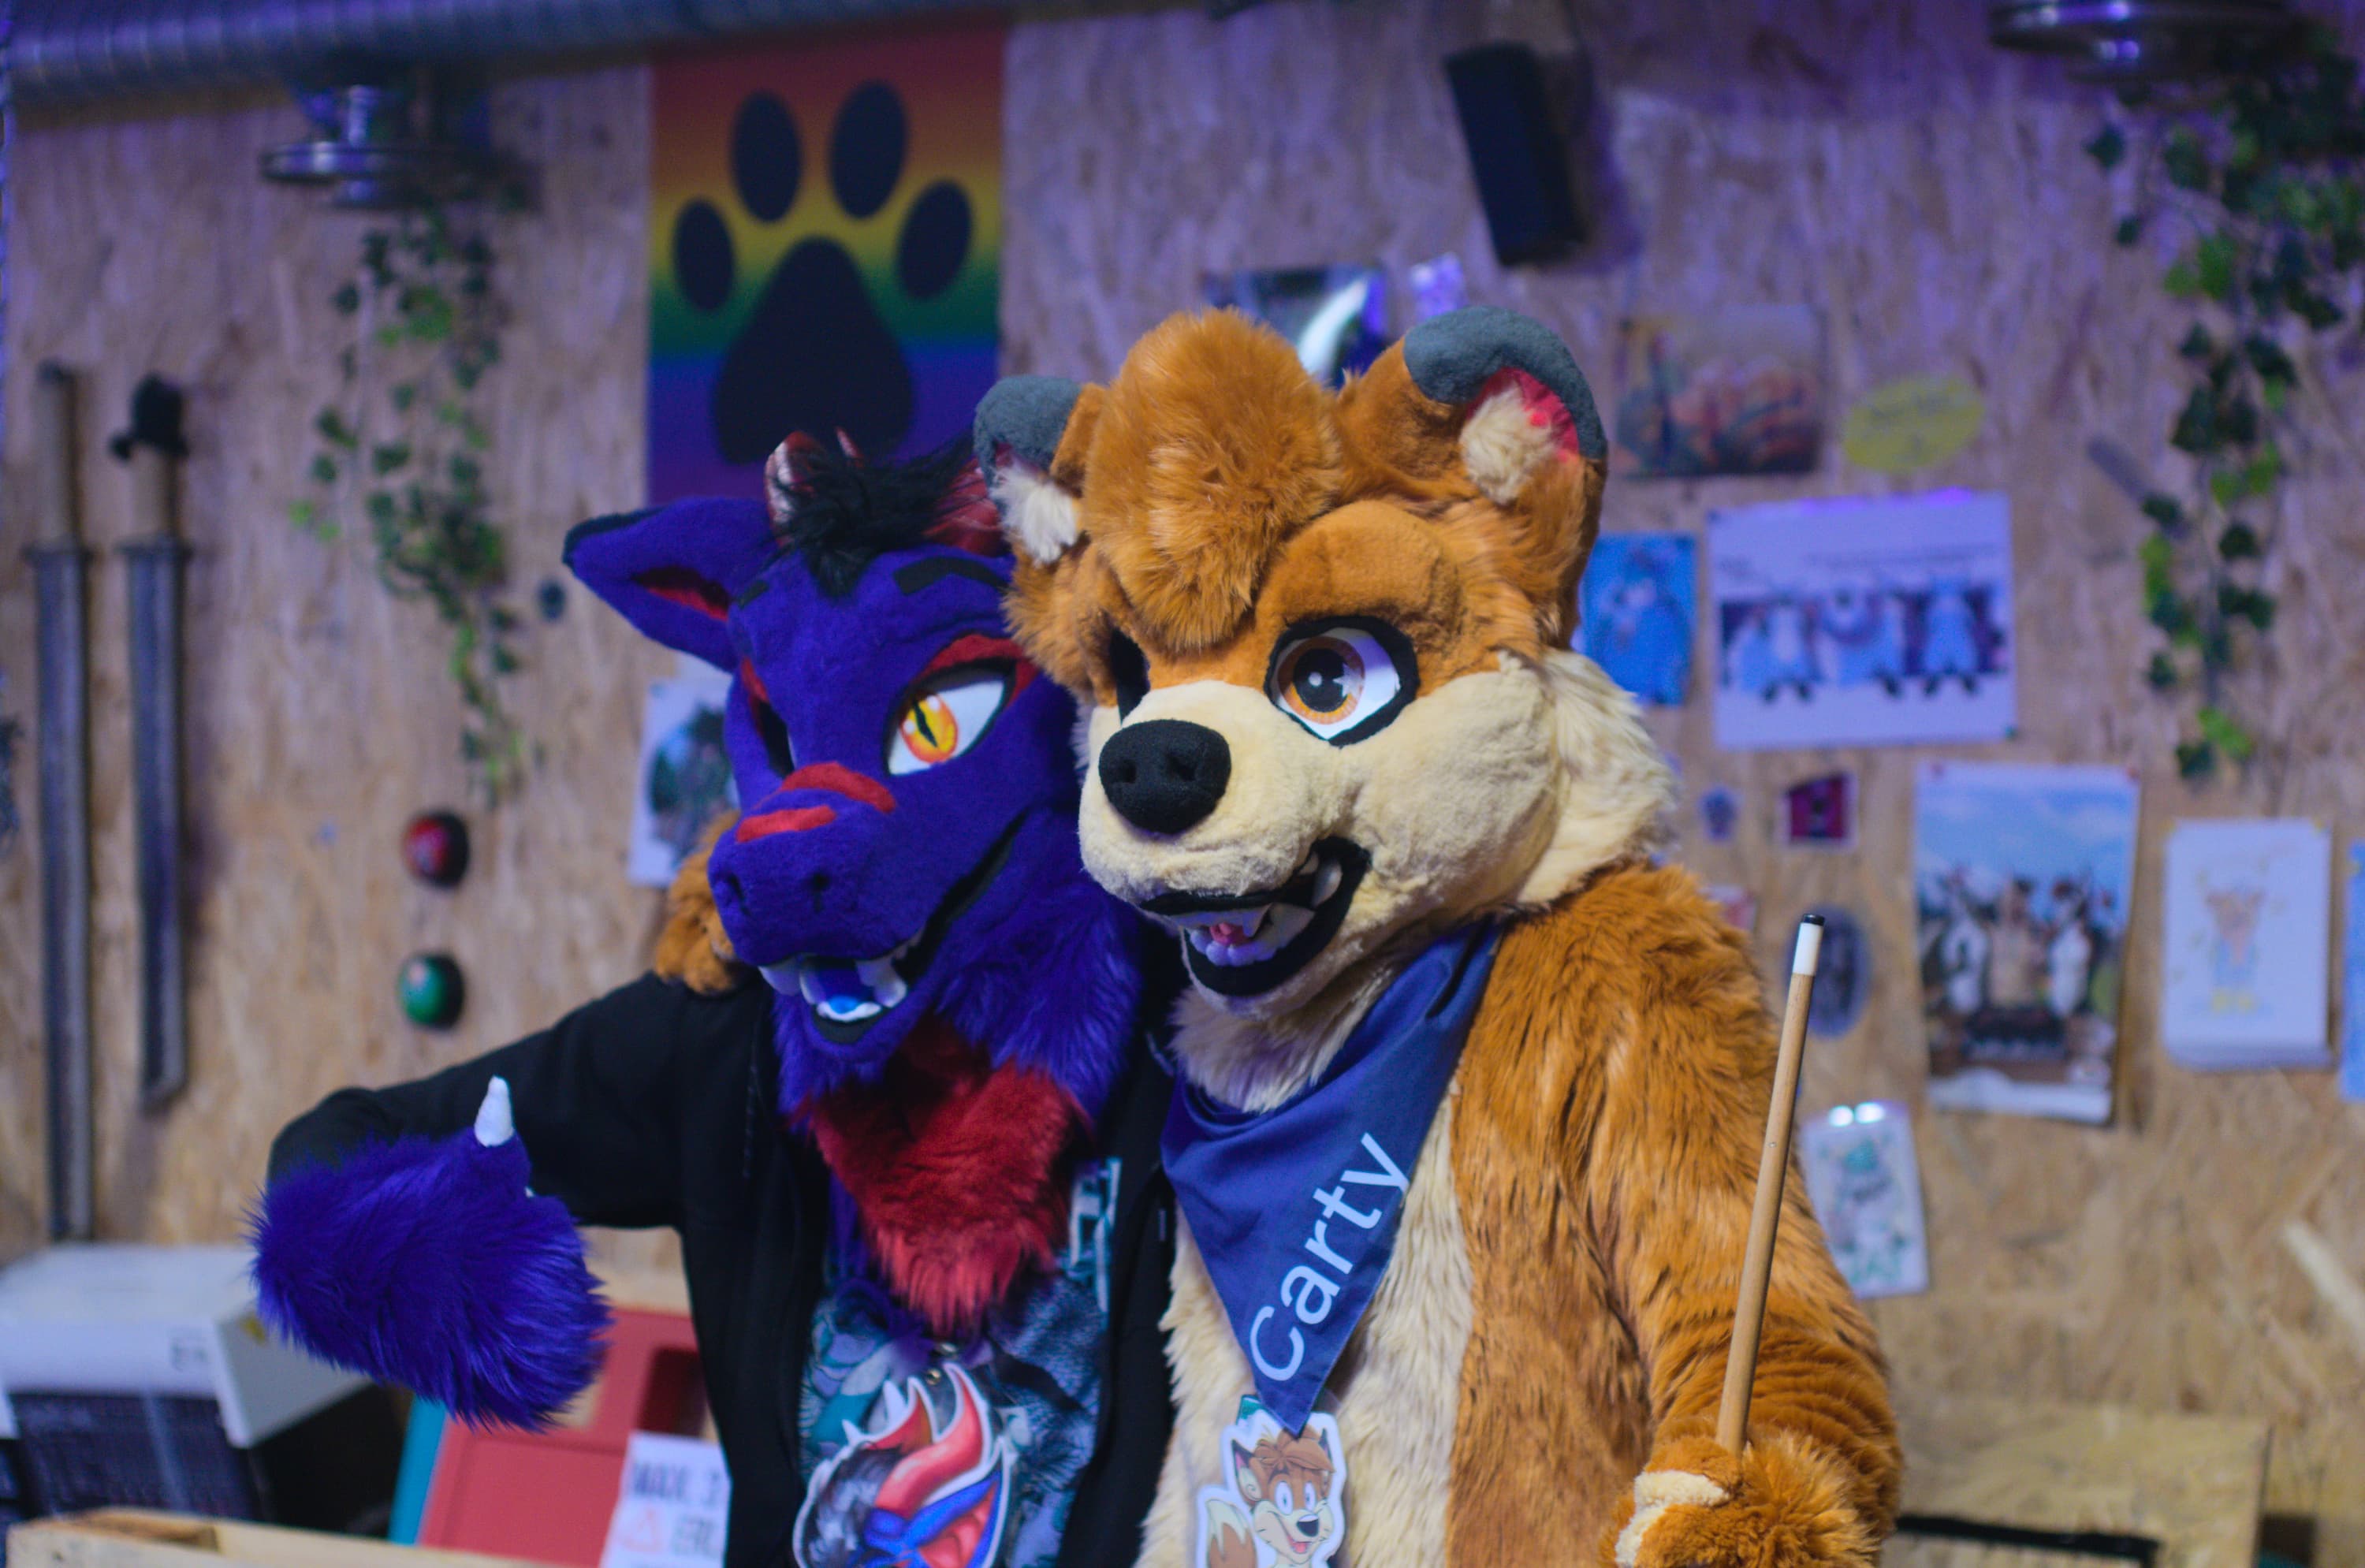 A blue dragon fursuit holding another fursuit in their arm, both holding pool cues.